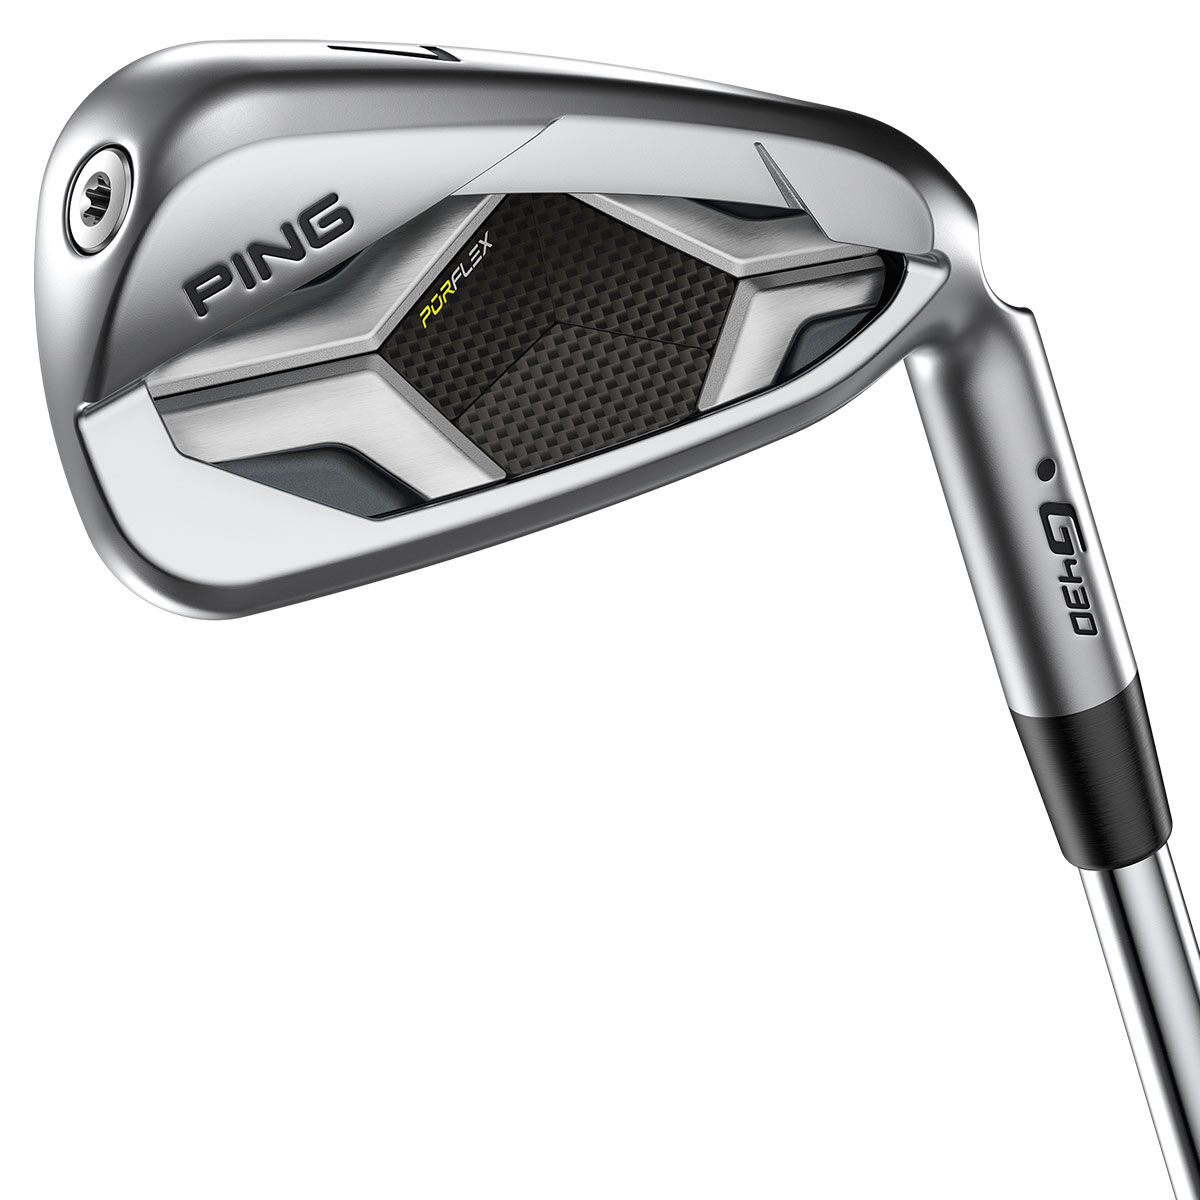 PING Golf Irons, Grey and Black G430 Steel Custom Fit | American Golf, One Size von Ping